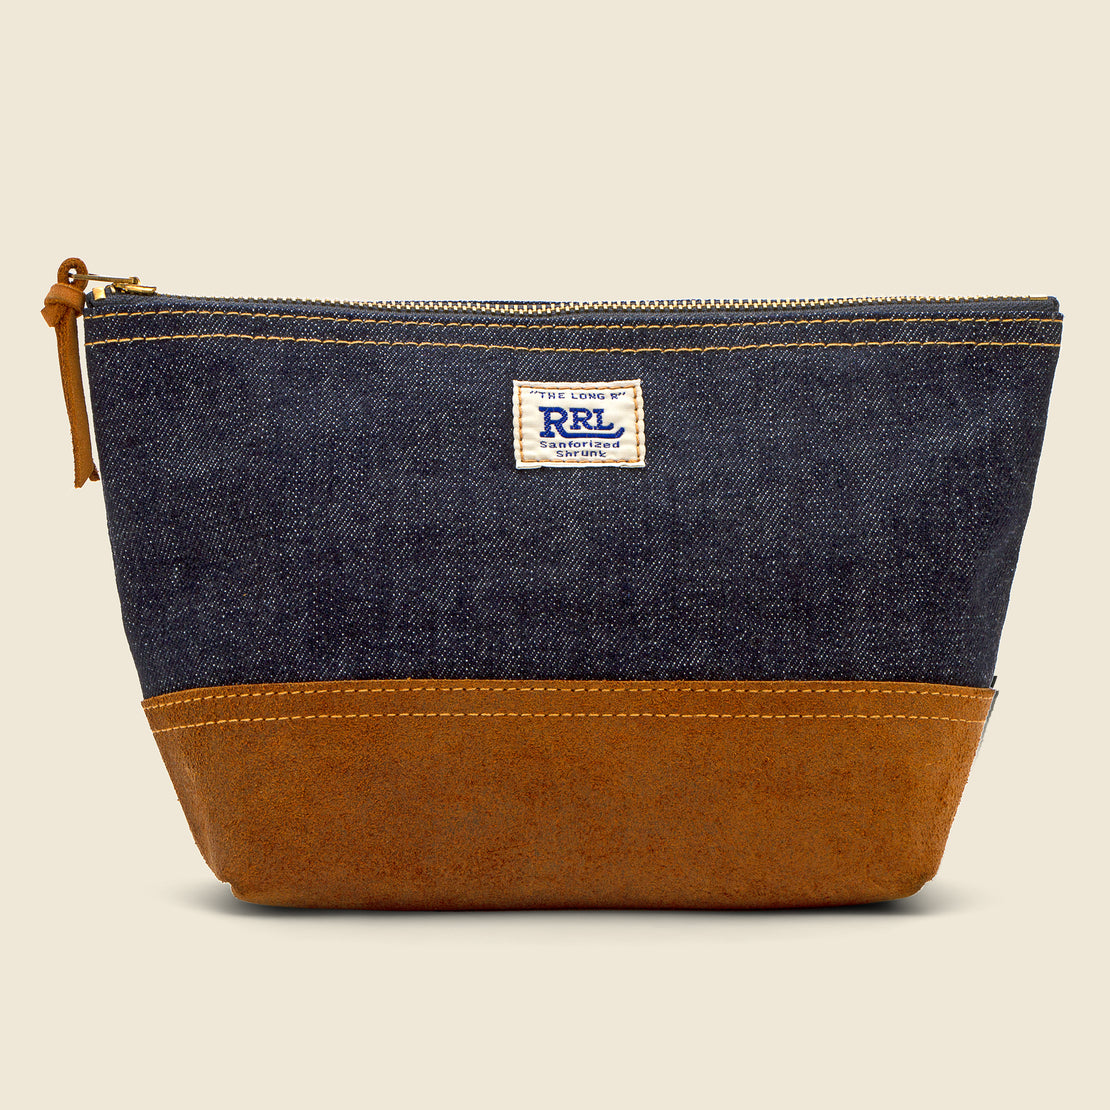 RRL Large Gusset Pouch - Indigo/Brown Suede